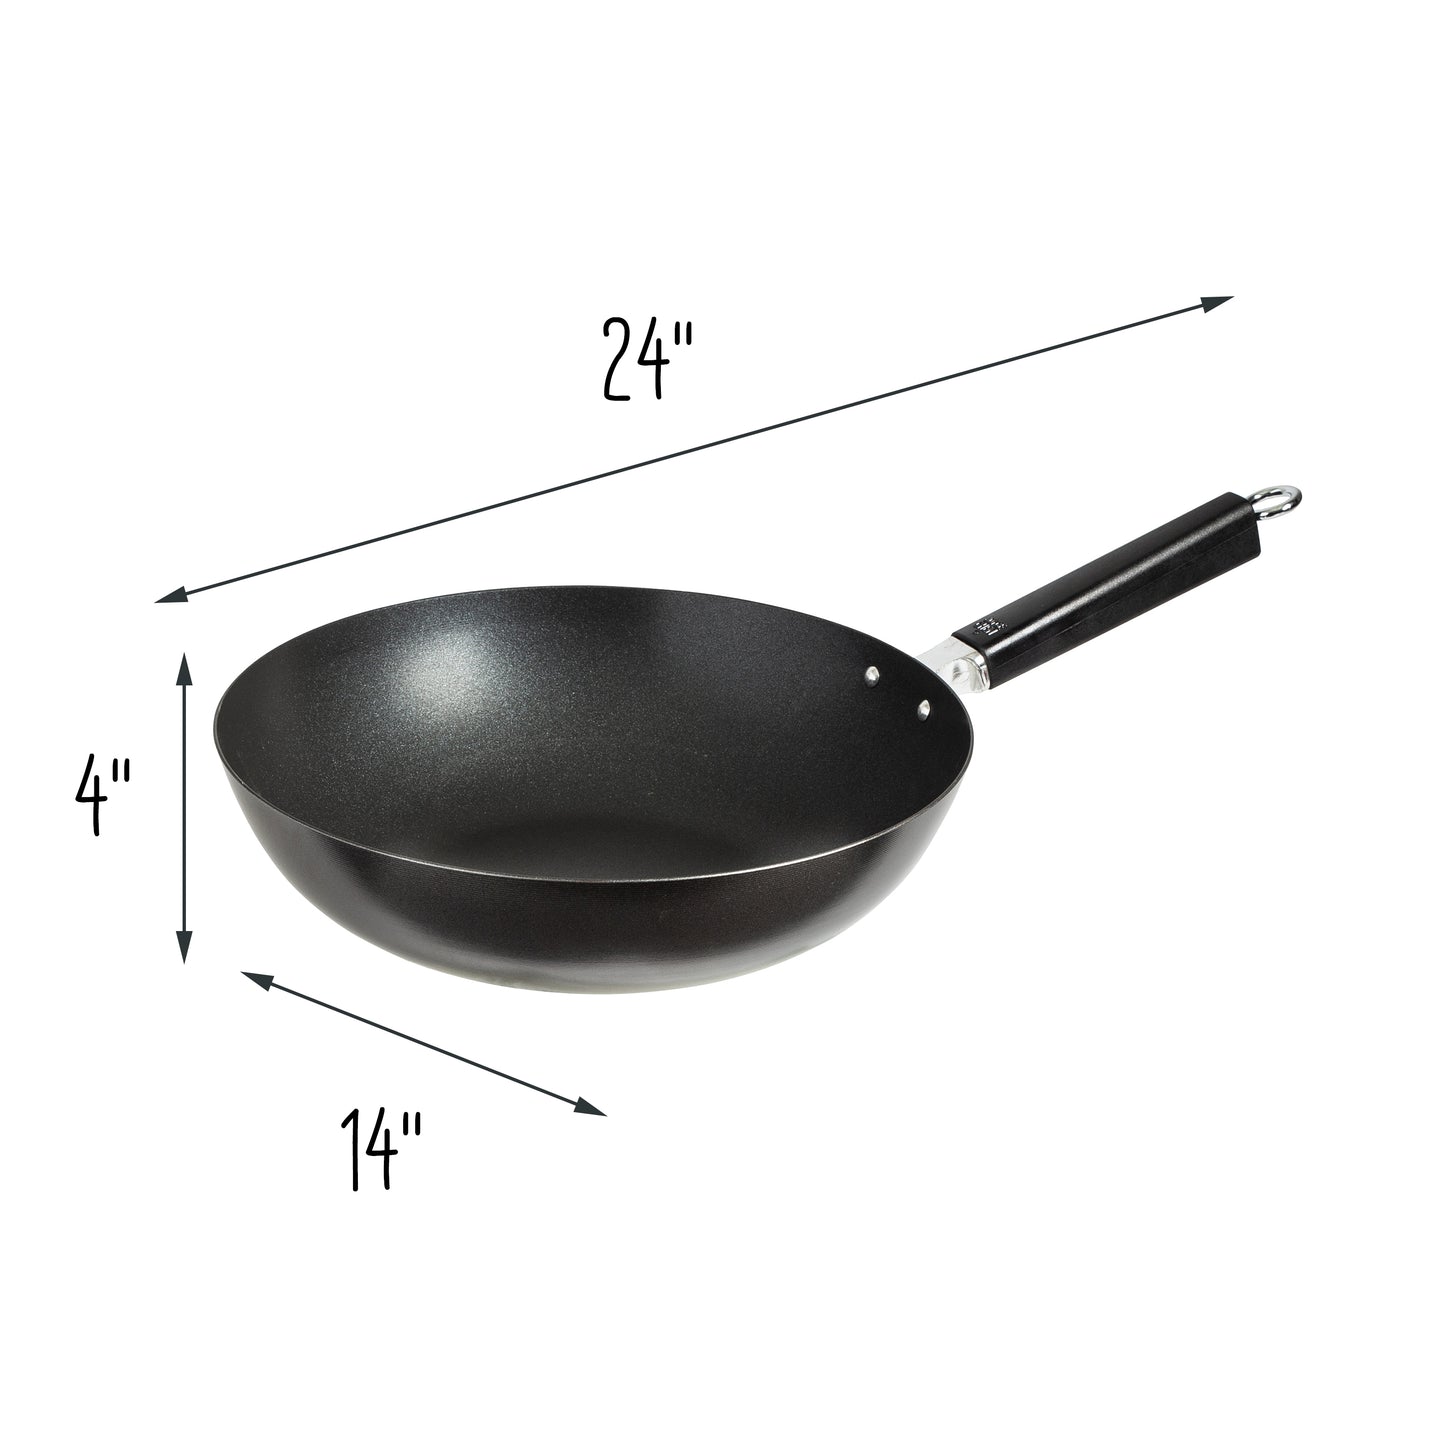 Professional Series 12-Inch Carbon Steel Excalibur Nonstick Stir Fry Pan with Phenolic Handle